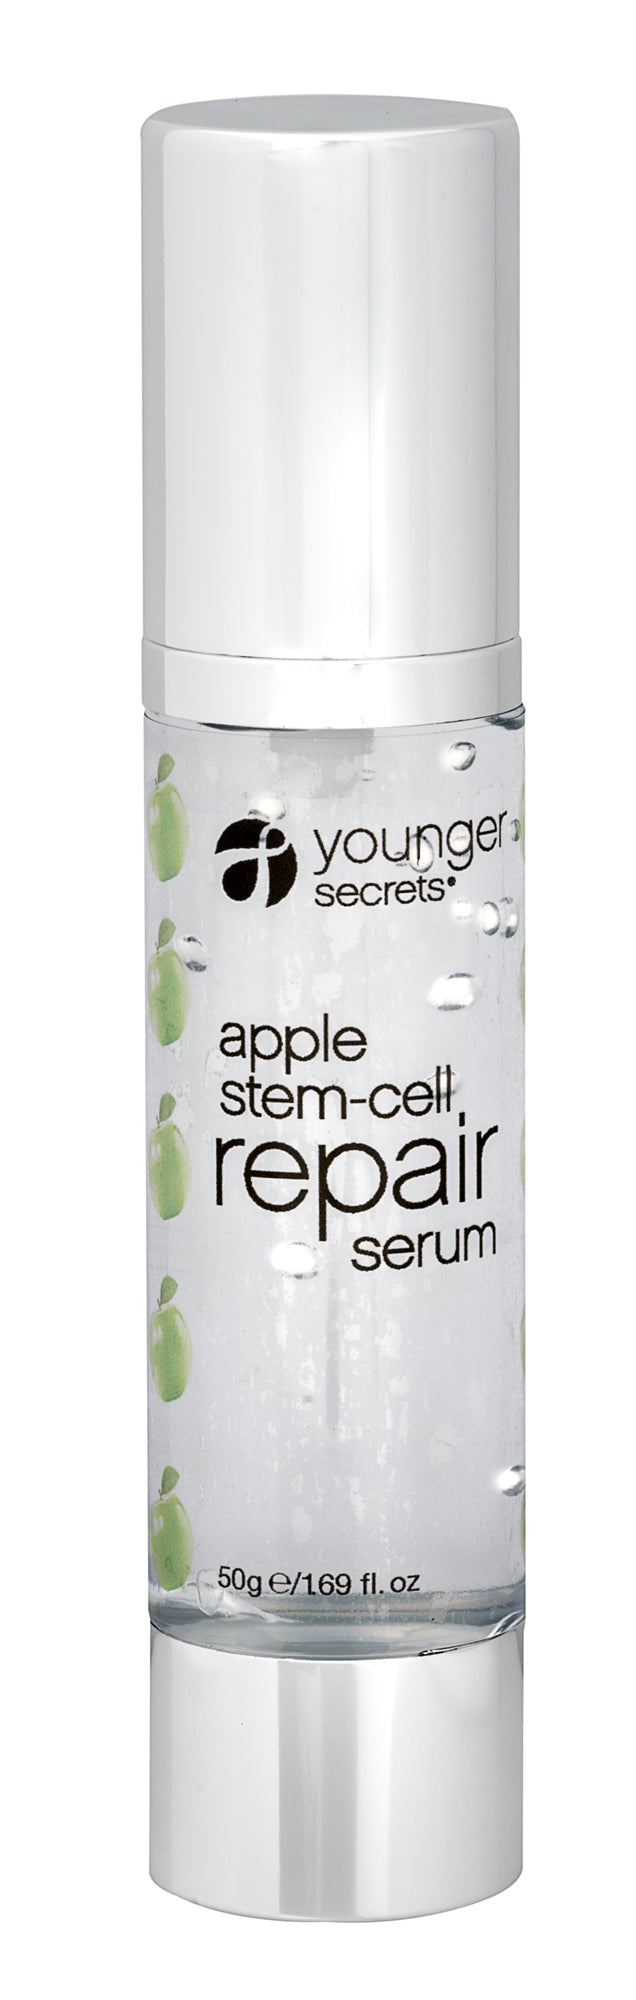 apple stem-cell repair serum with hyaluronic, collagen peptides and flaxleaf gel (50g)